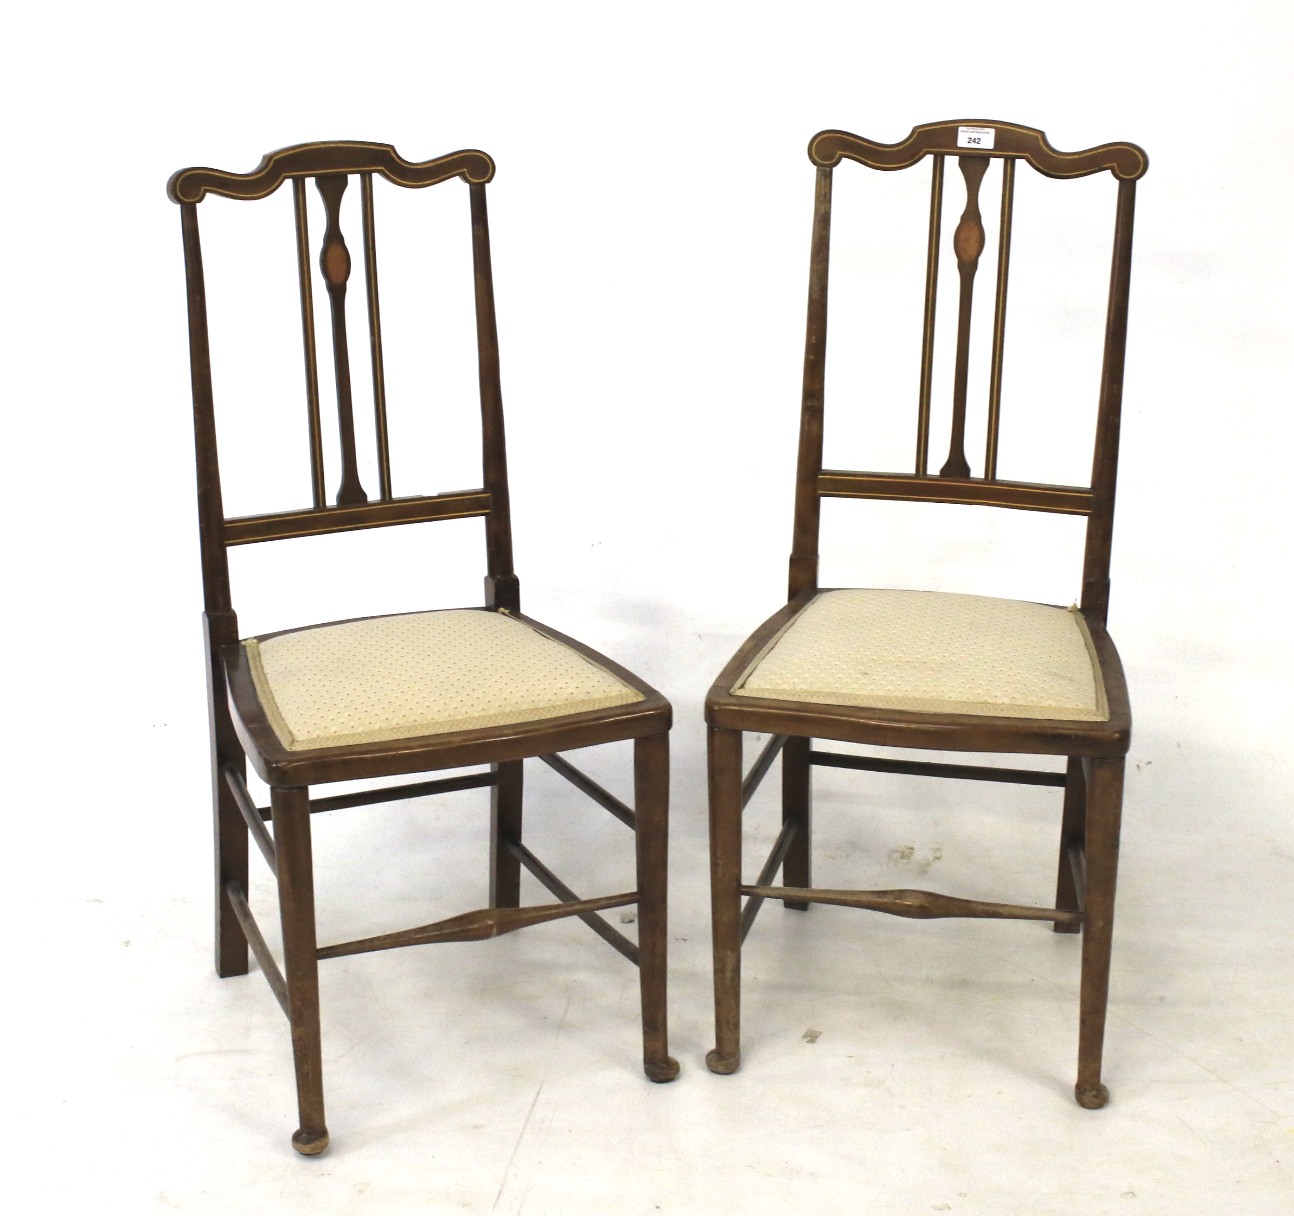 Pair of wooden chairs.